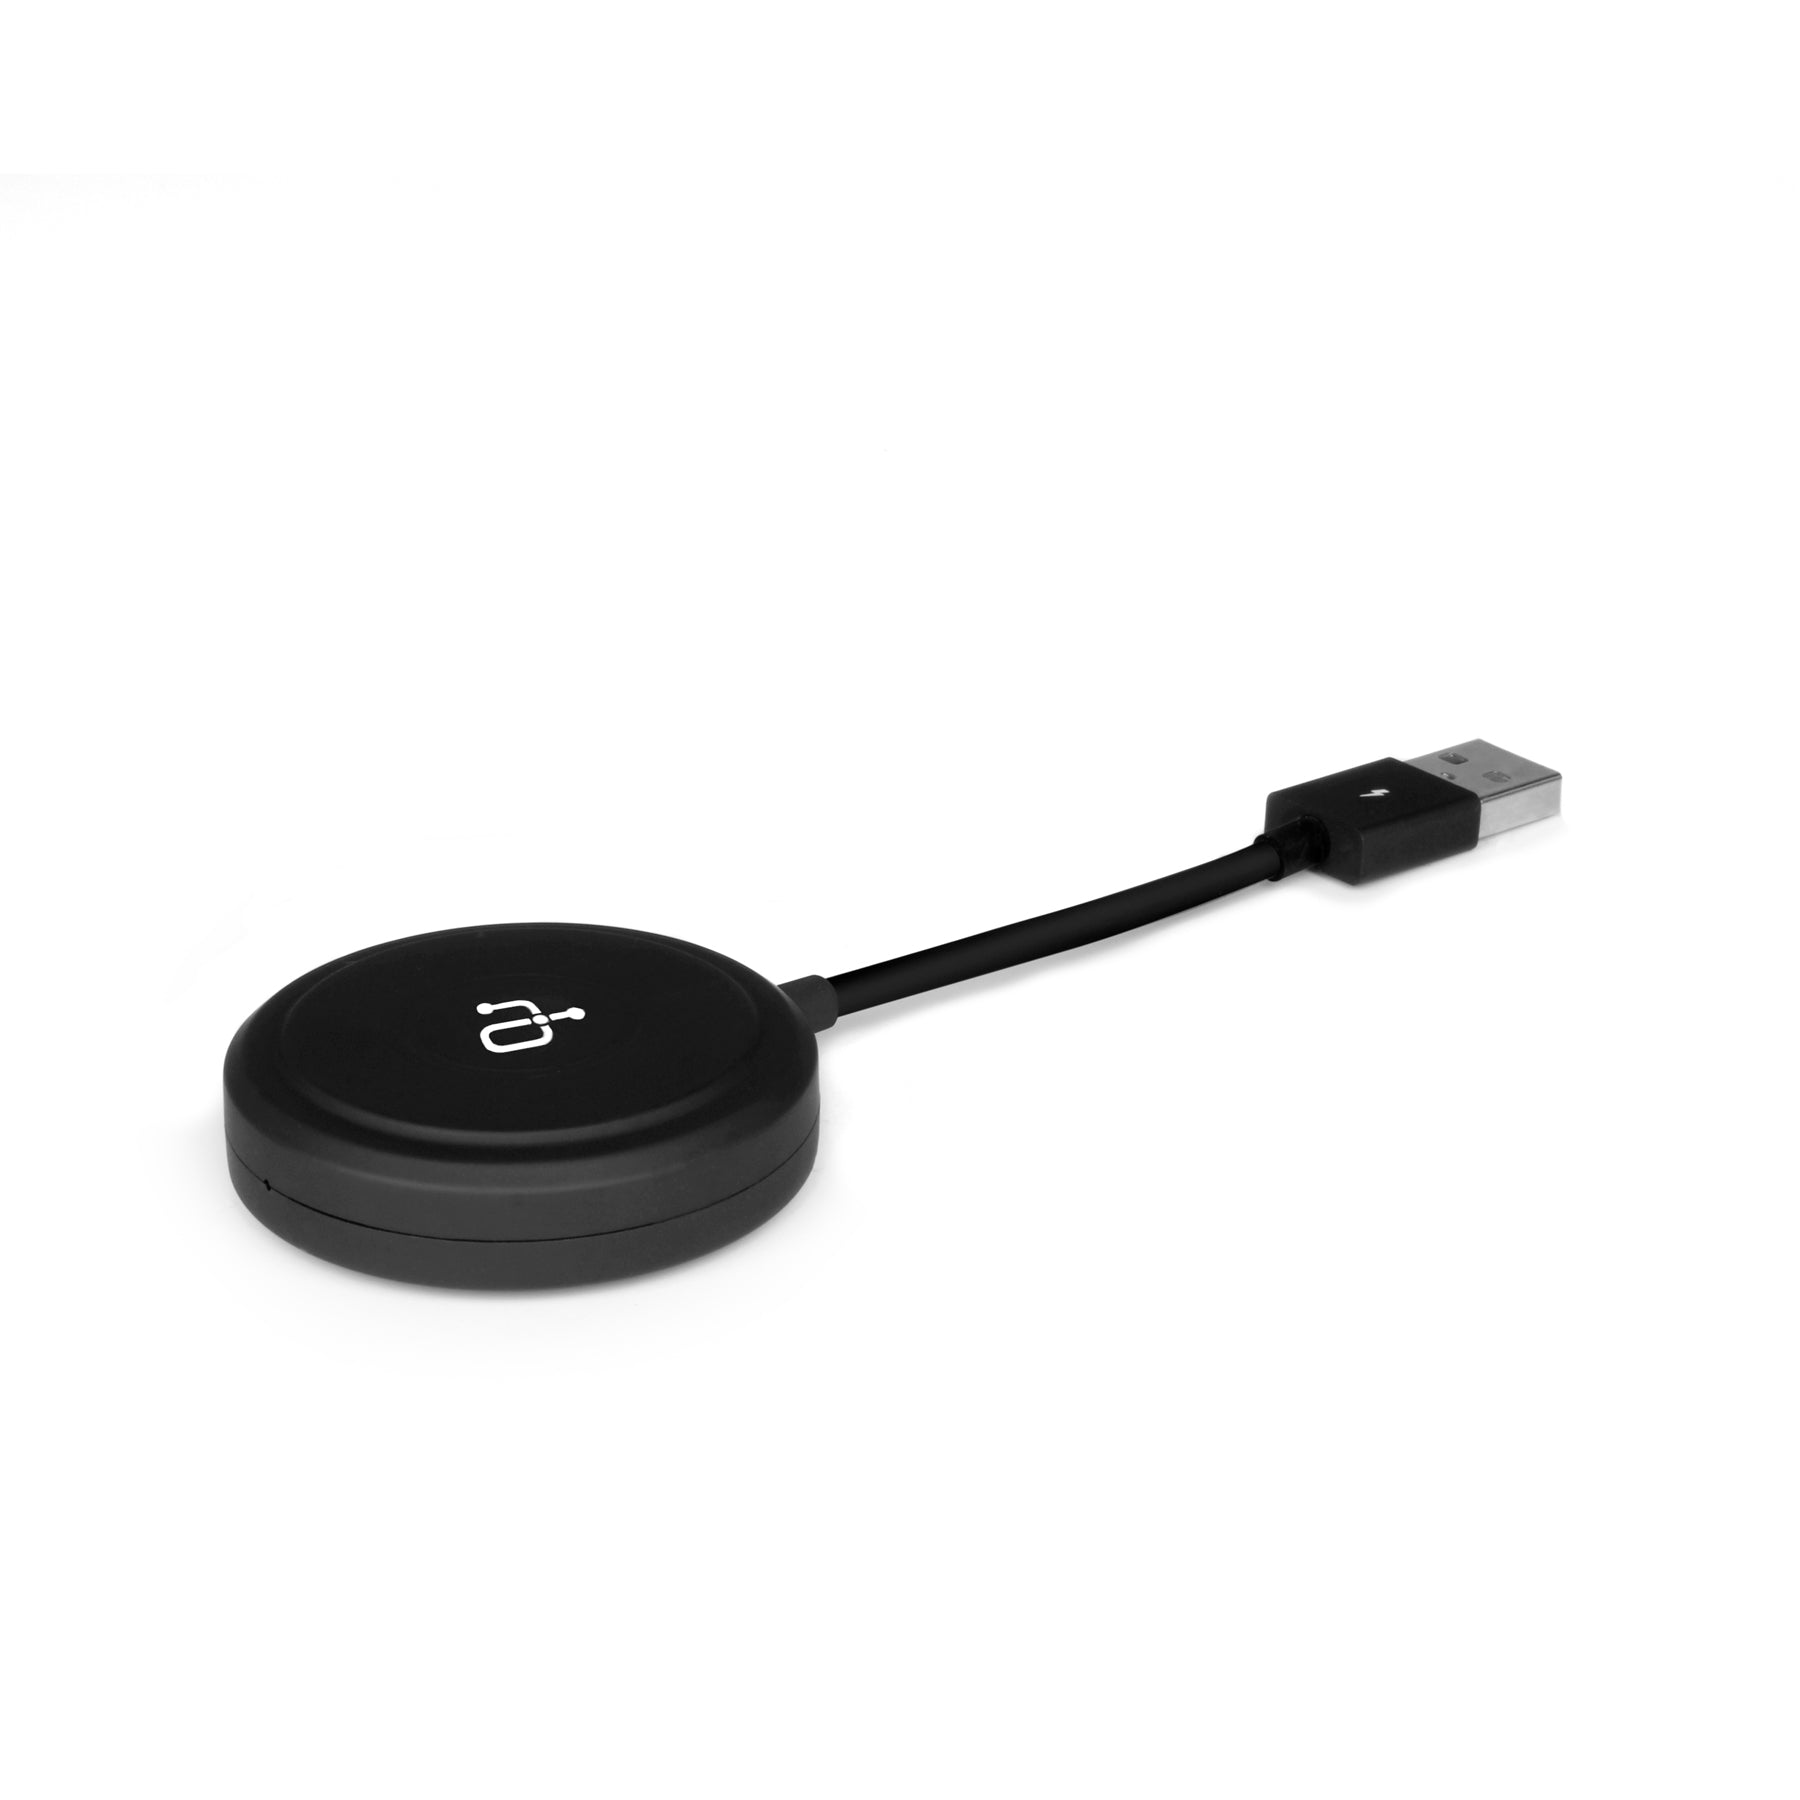 Wireless car adapter for Android Auto™